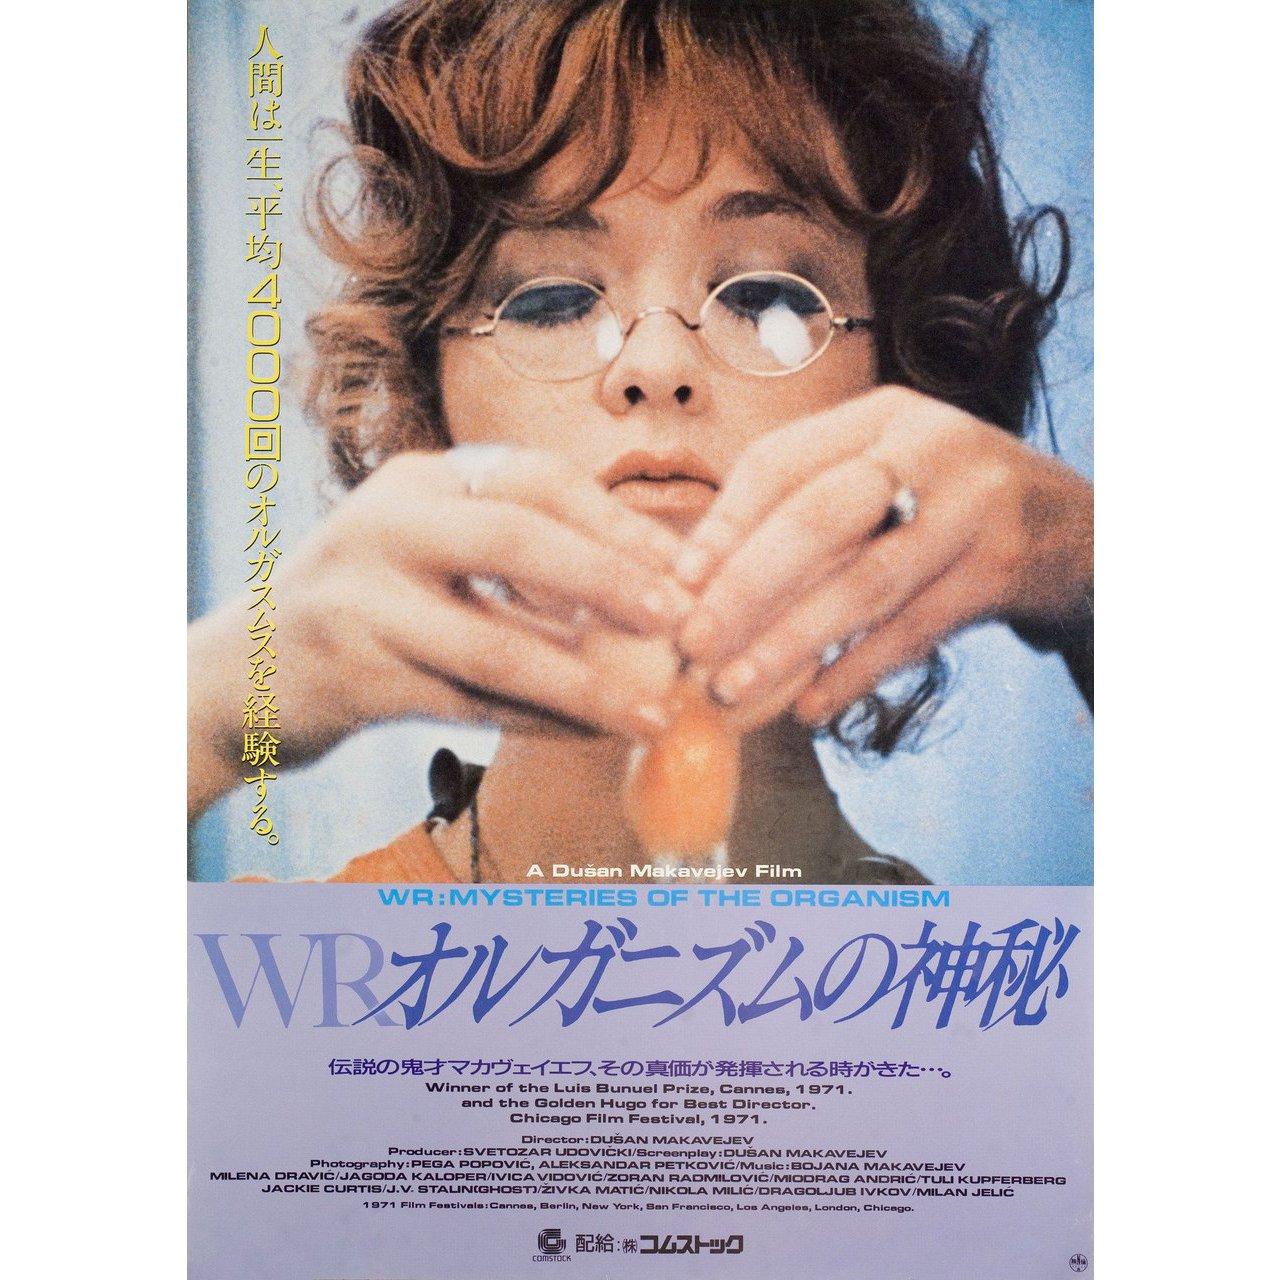 Original 1988 Japanese B2 poster for the 1971 film 'WR: Mysteries of the Organism' (W.R. - Misterije organizma) directed by Dusan Makavejev with Milena Dravic / Ivica Vidovic / Jagoda Kaloper / Tuli Kupferberg. Fine condition, rolled. Please note: